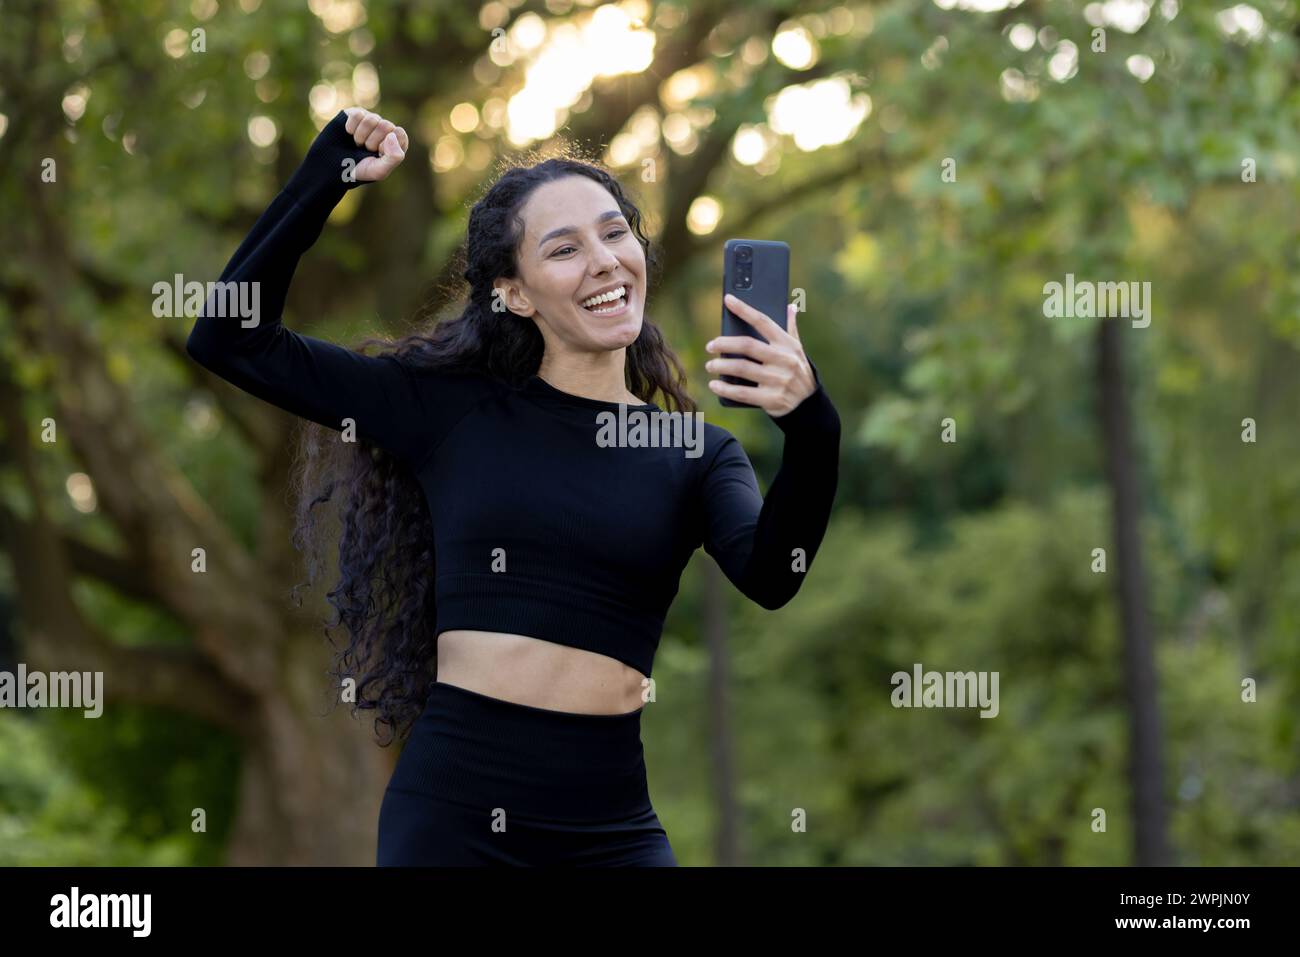 Smiling, active female in athletic attire captures a cheerful moment on her phone, embodying health and happiness. Stock Photo